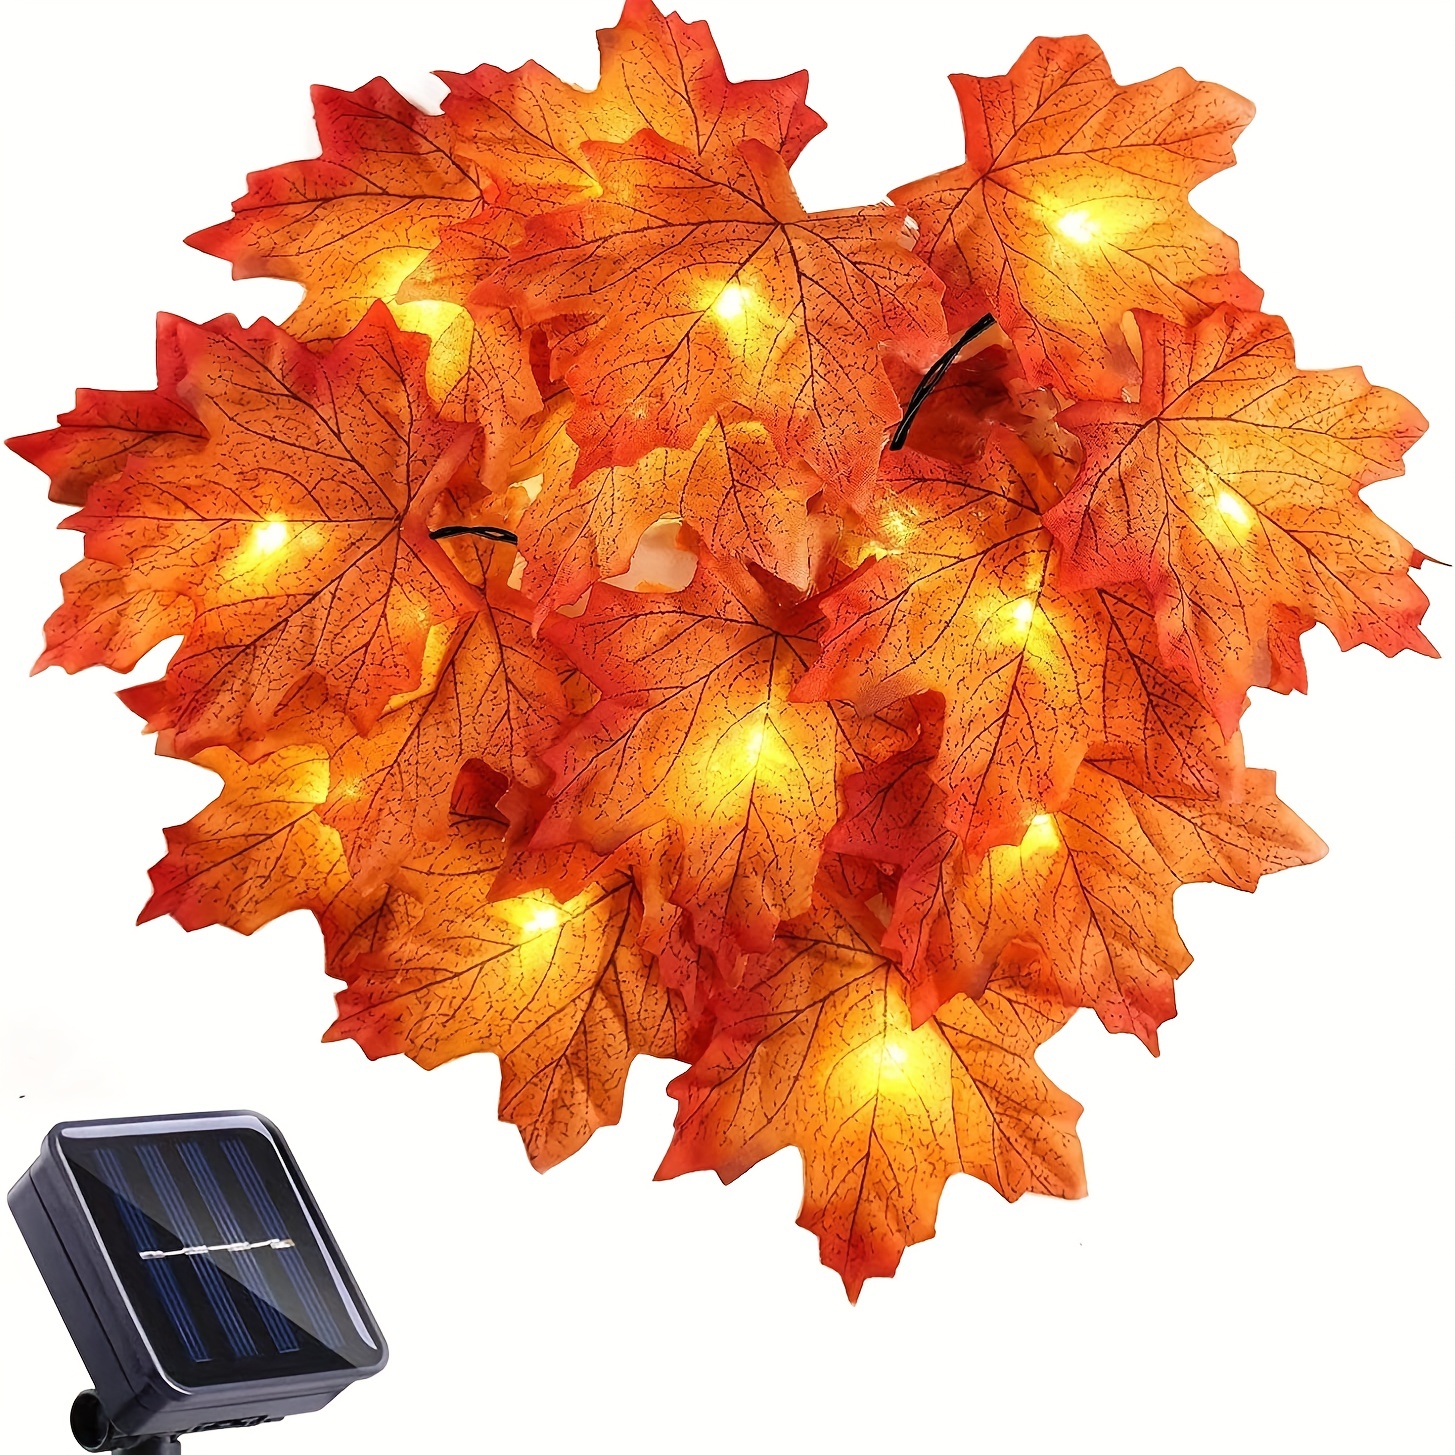 1pc 11m 36ft 8 modes solar string light leaf light twinkle hanging light for indoor outdoor garden halloween thanksgiving christmas party decor 60 lights included 2m lead wire details 0